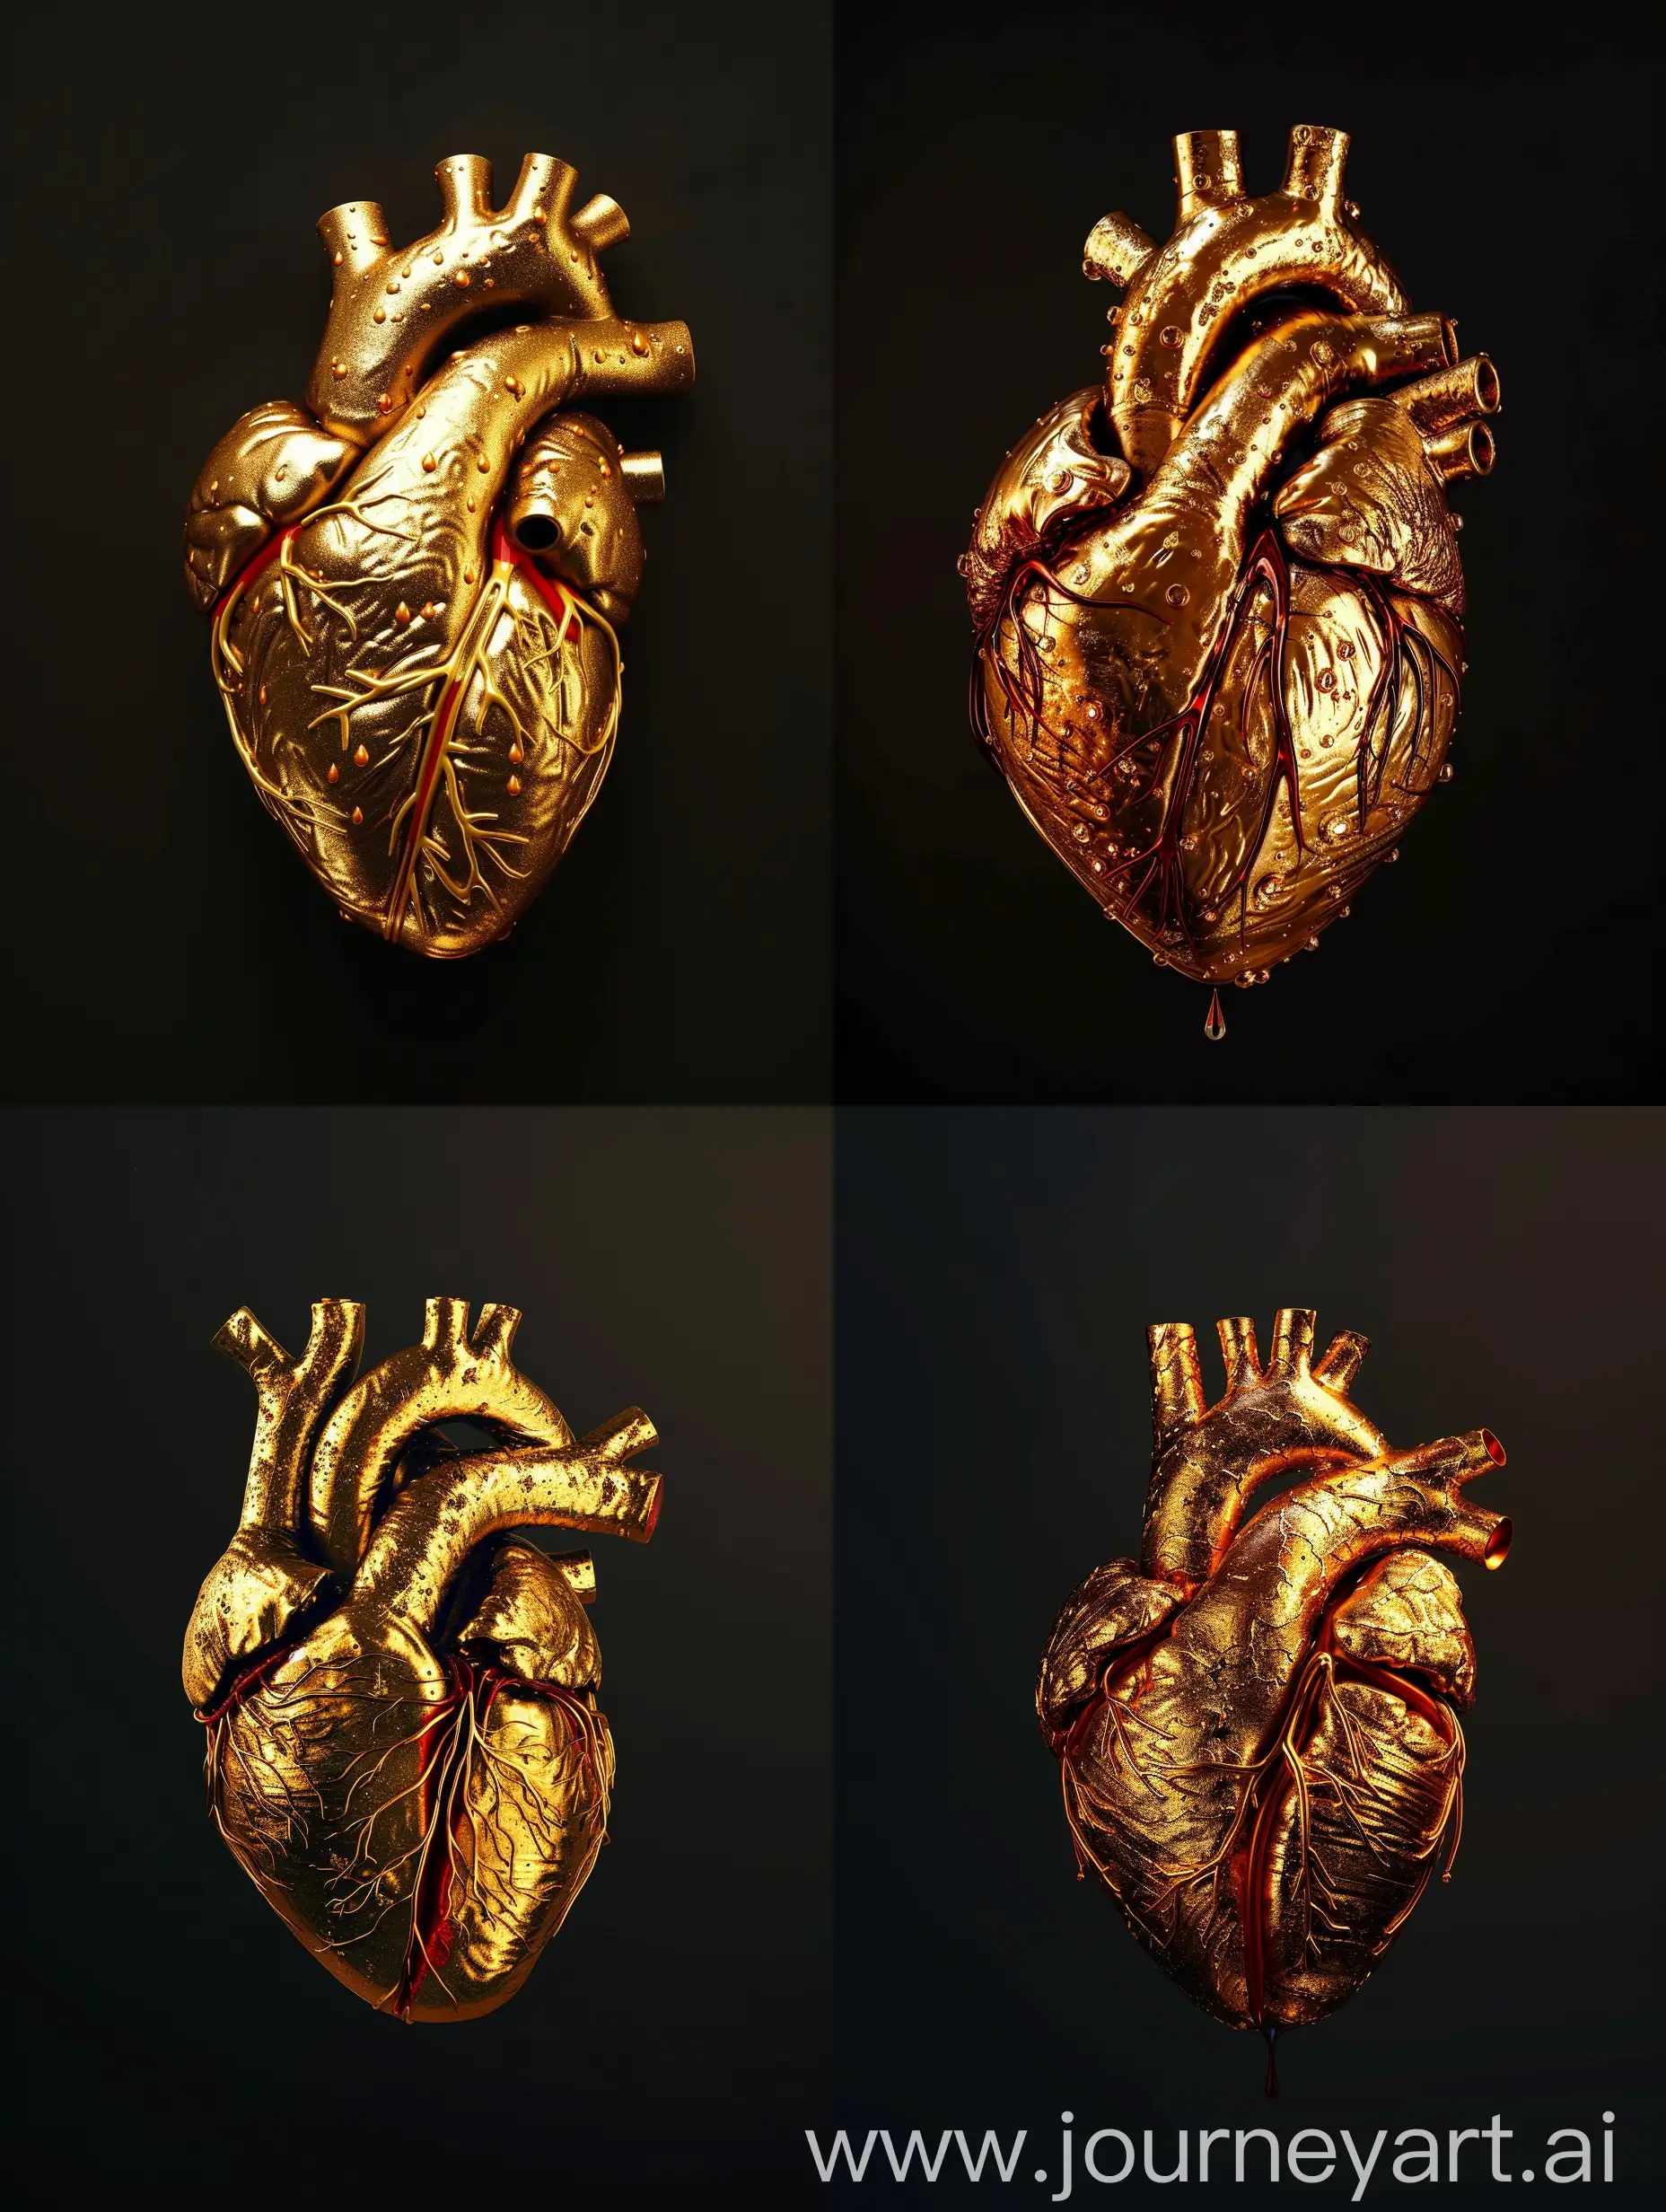 A golden human heart, with blood in its veins, on a black background
